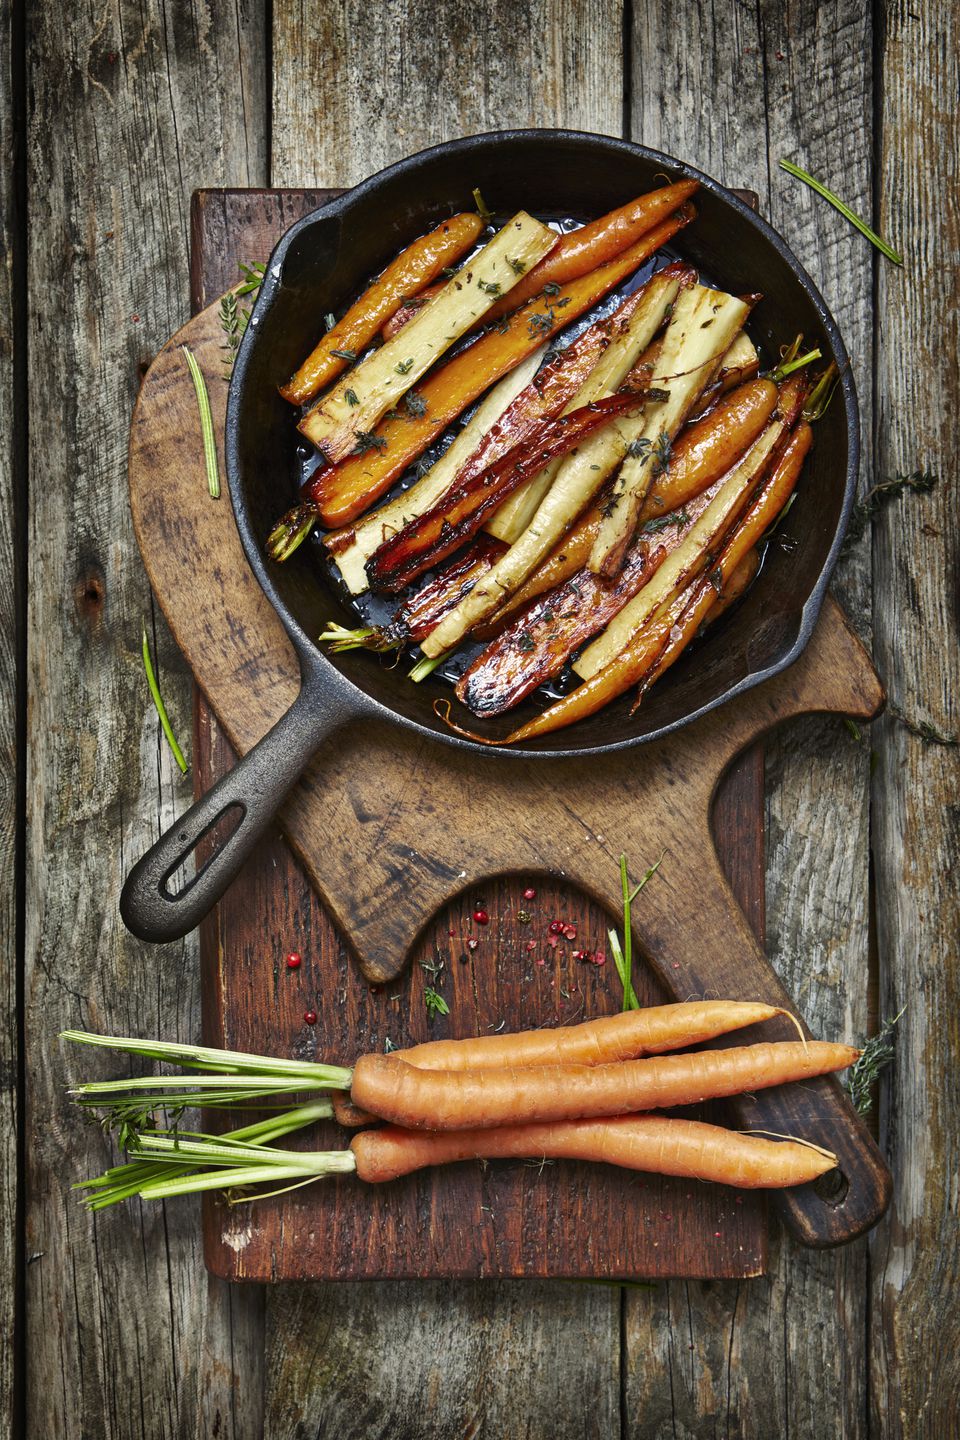 carrots and parsnips